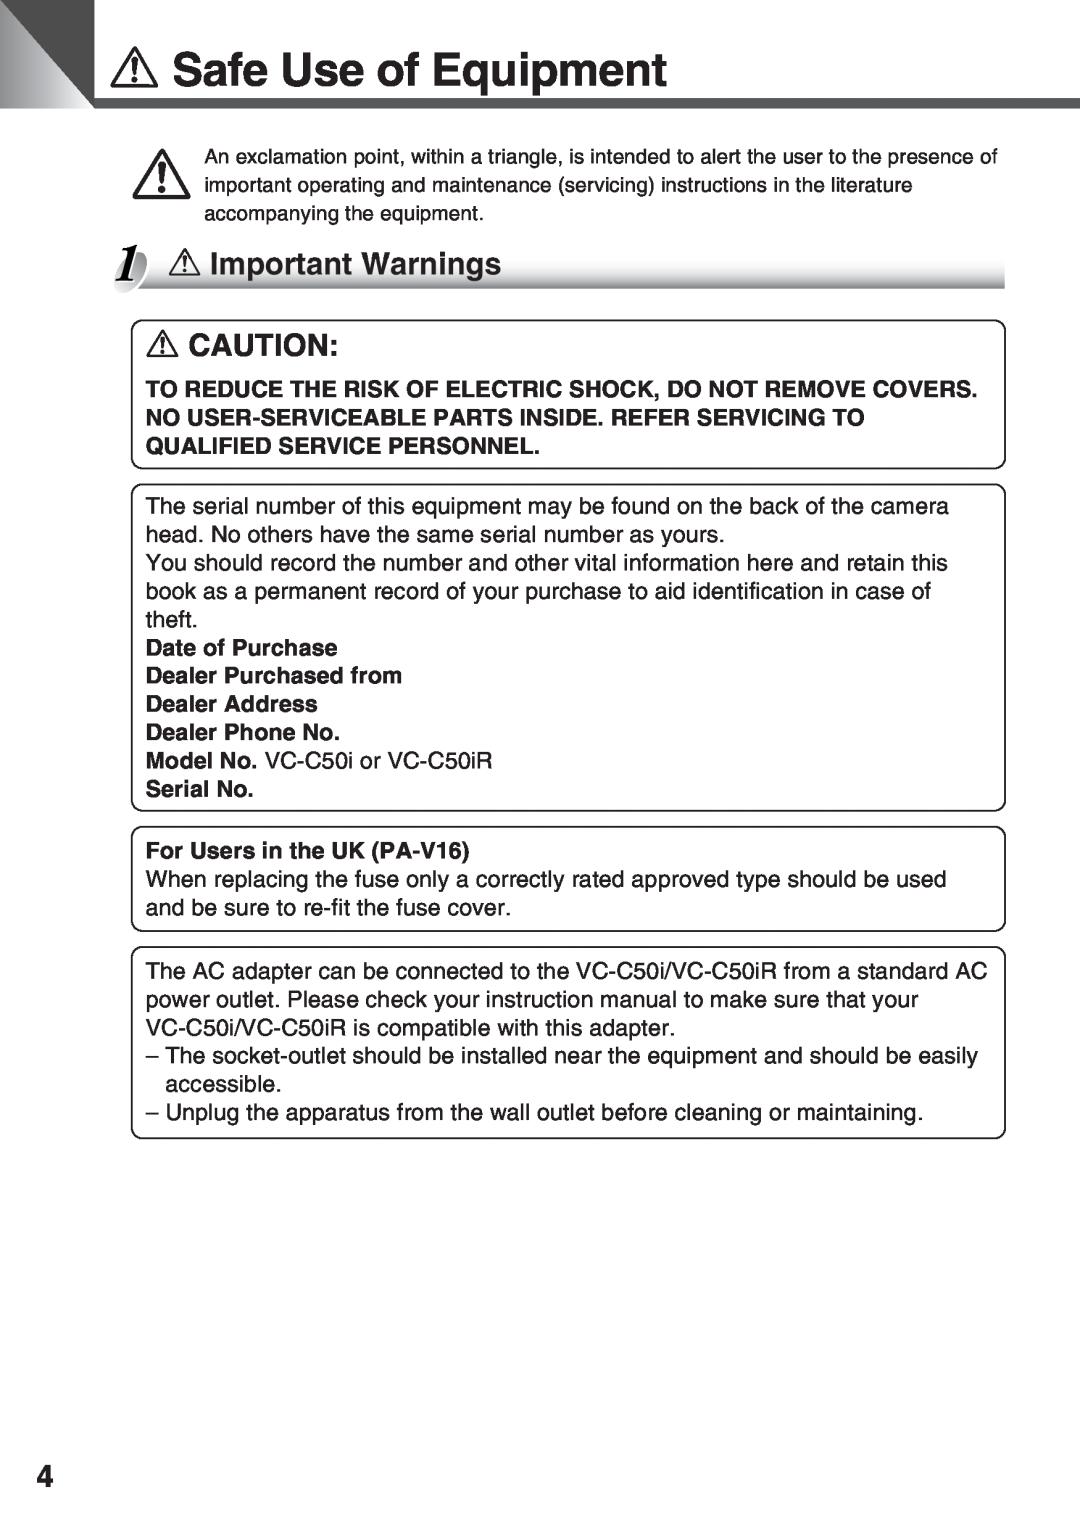 Canon VC-C50IR, VC-C50i instruction manual a Safe Use of Equipment, a Important Warnings aCAUTION 